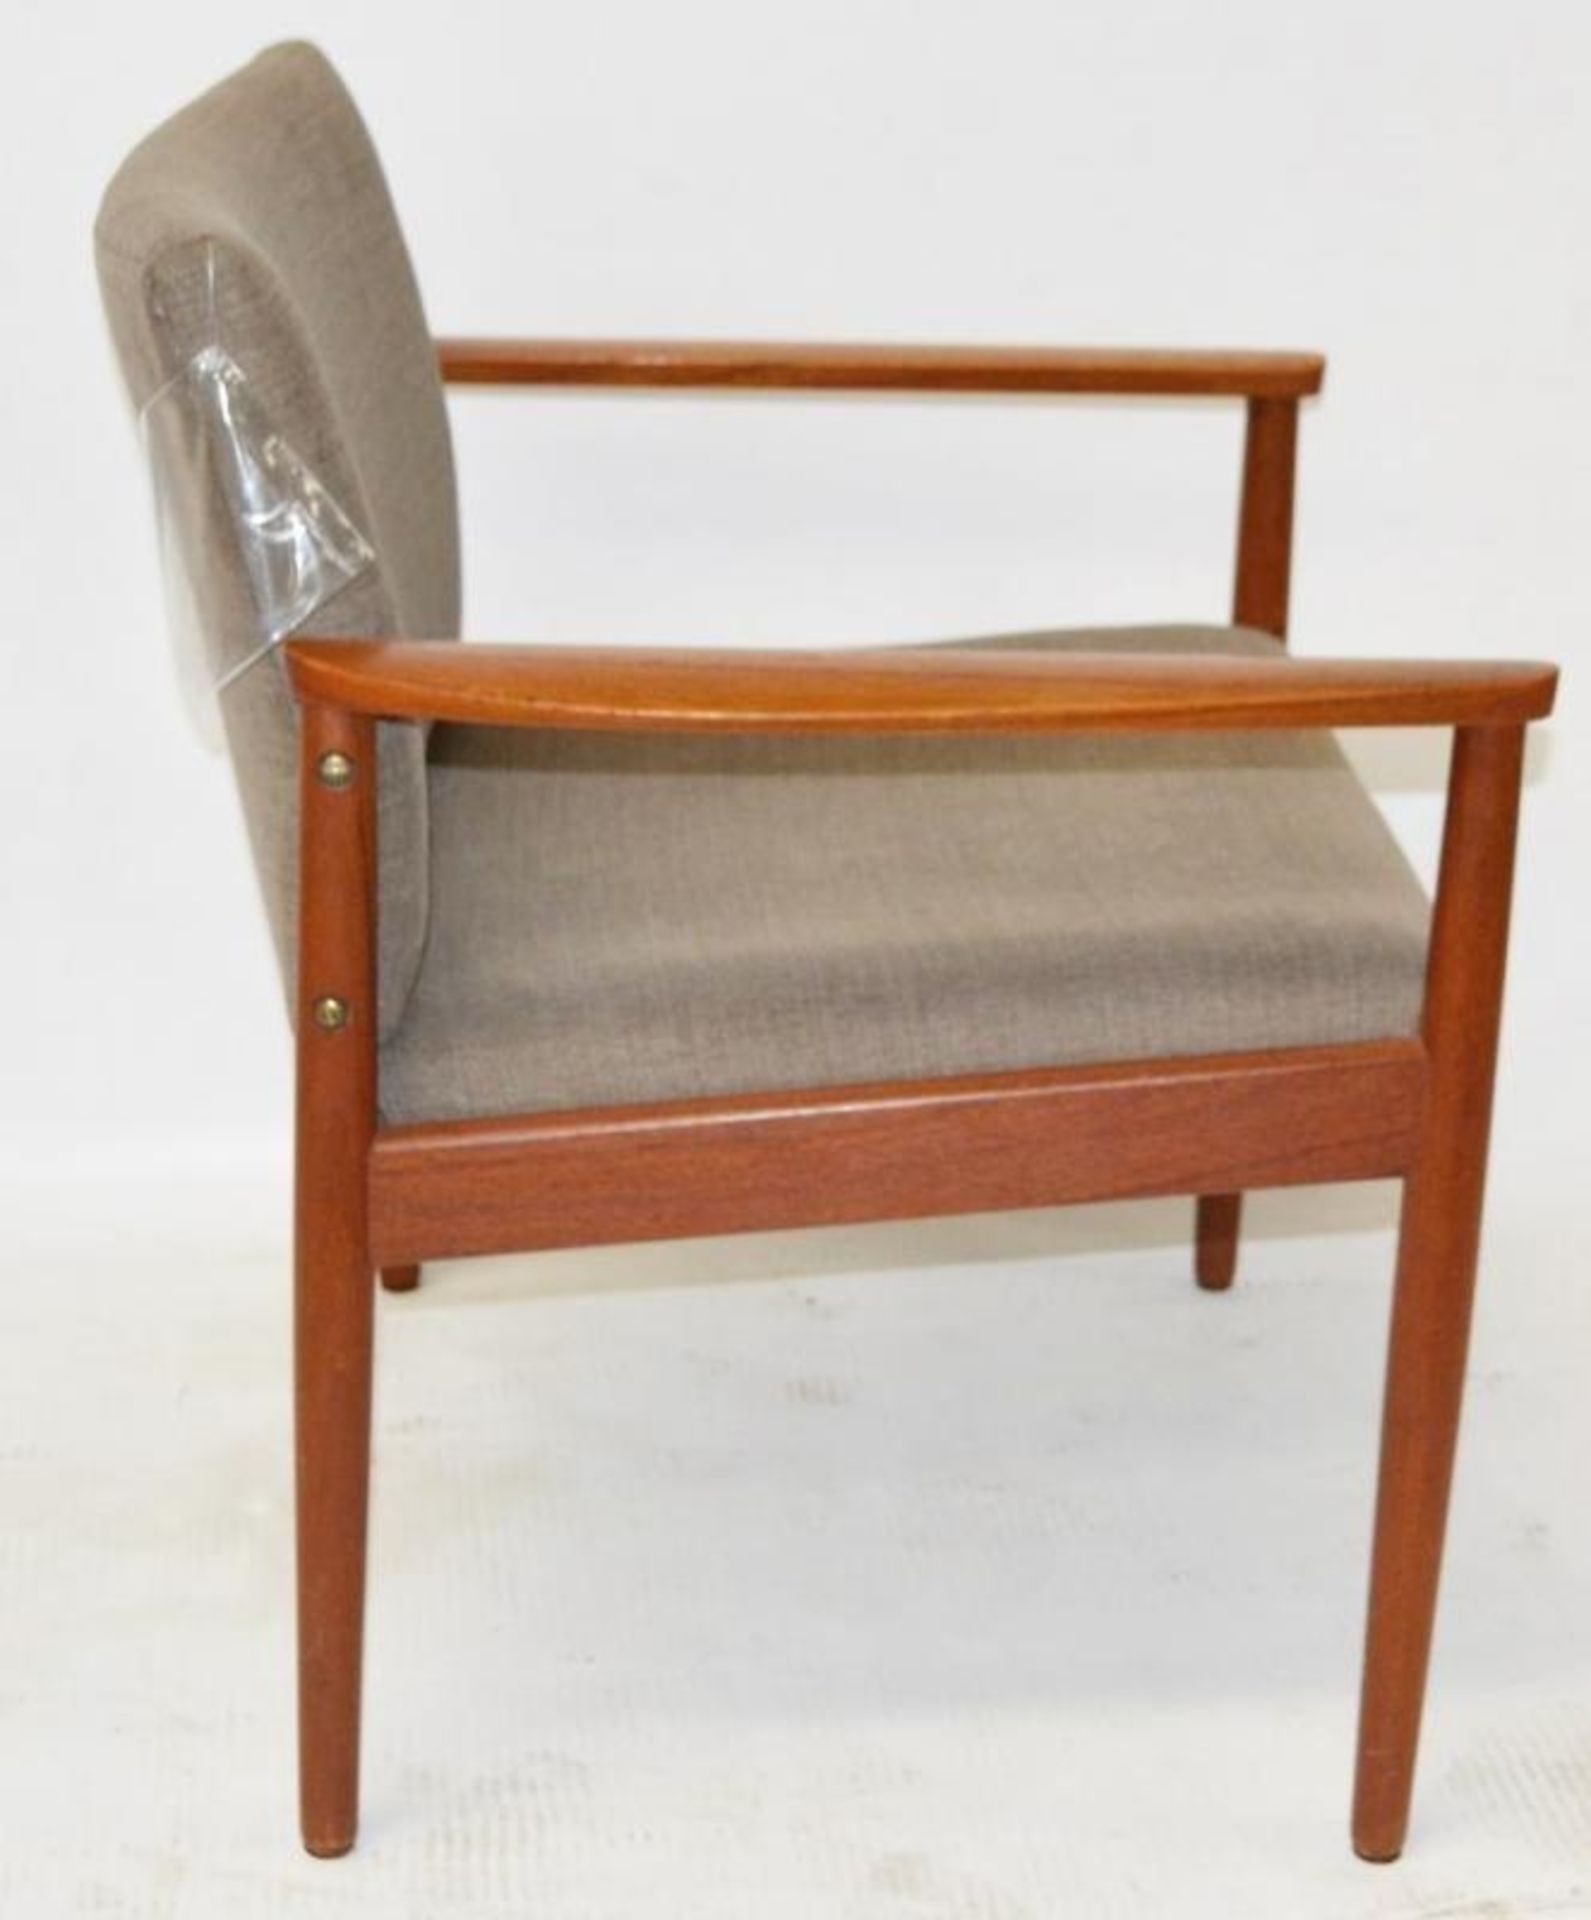 1 x JAB King Upholstery Mid Century Chair Hot Madison Reloaded Fab - Dimensions (approx): W68 x D57, - Image 6 of 6